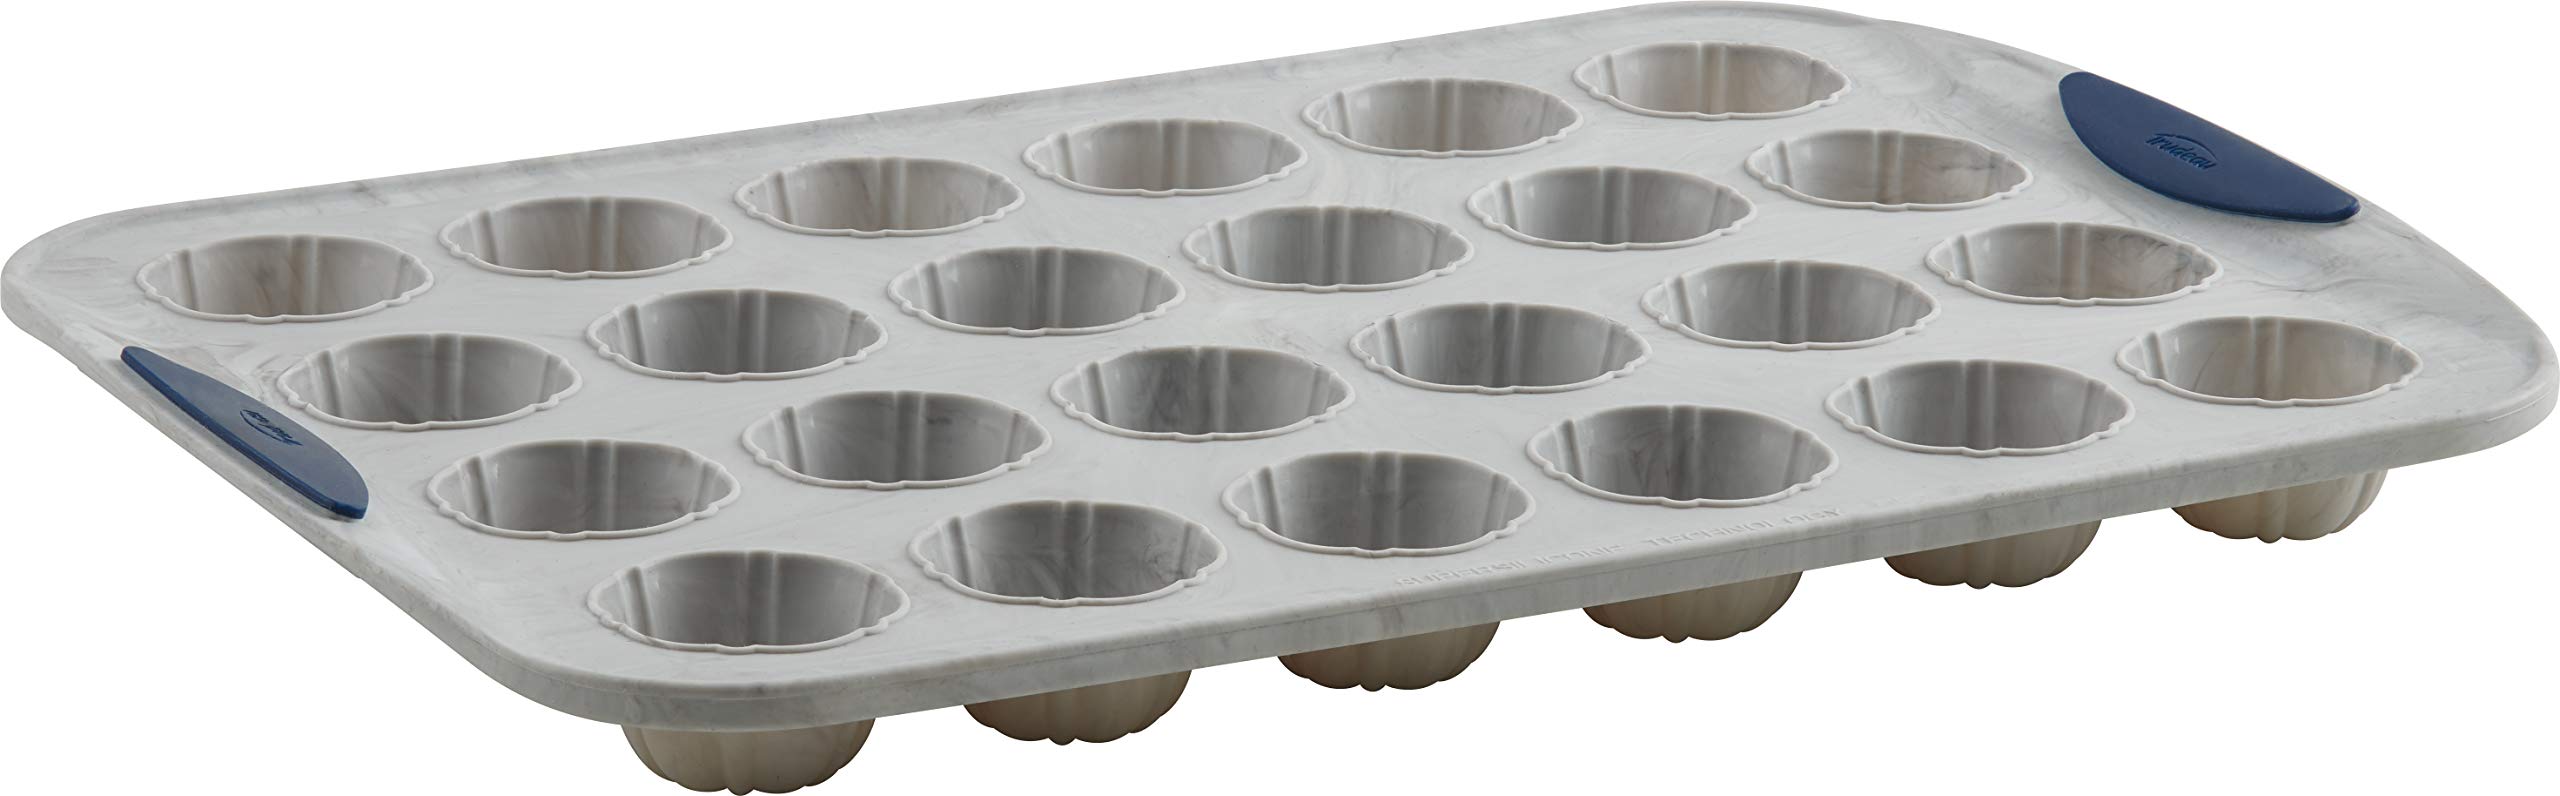 Trudeau Set of Two Mini Cake Muffin Silicone Pans, Marble, Gray, 24-count